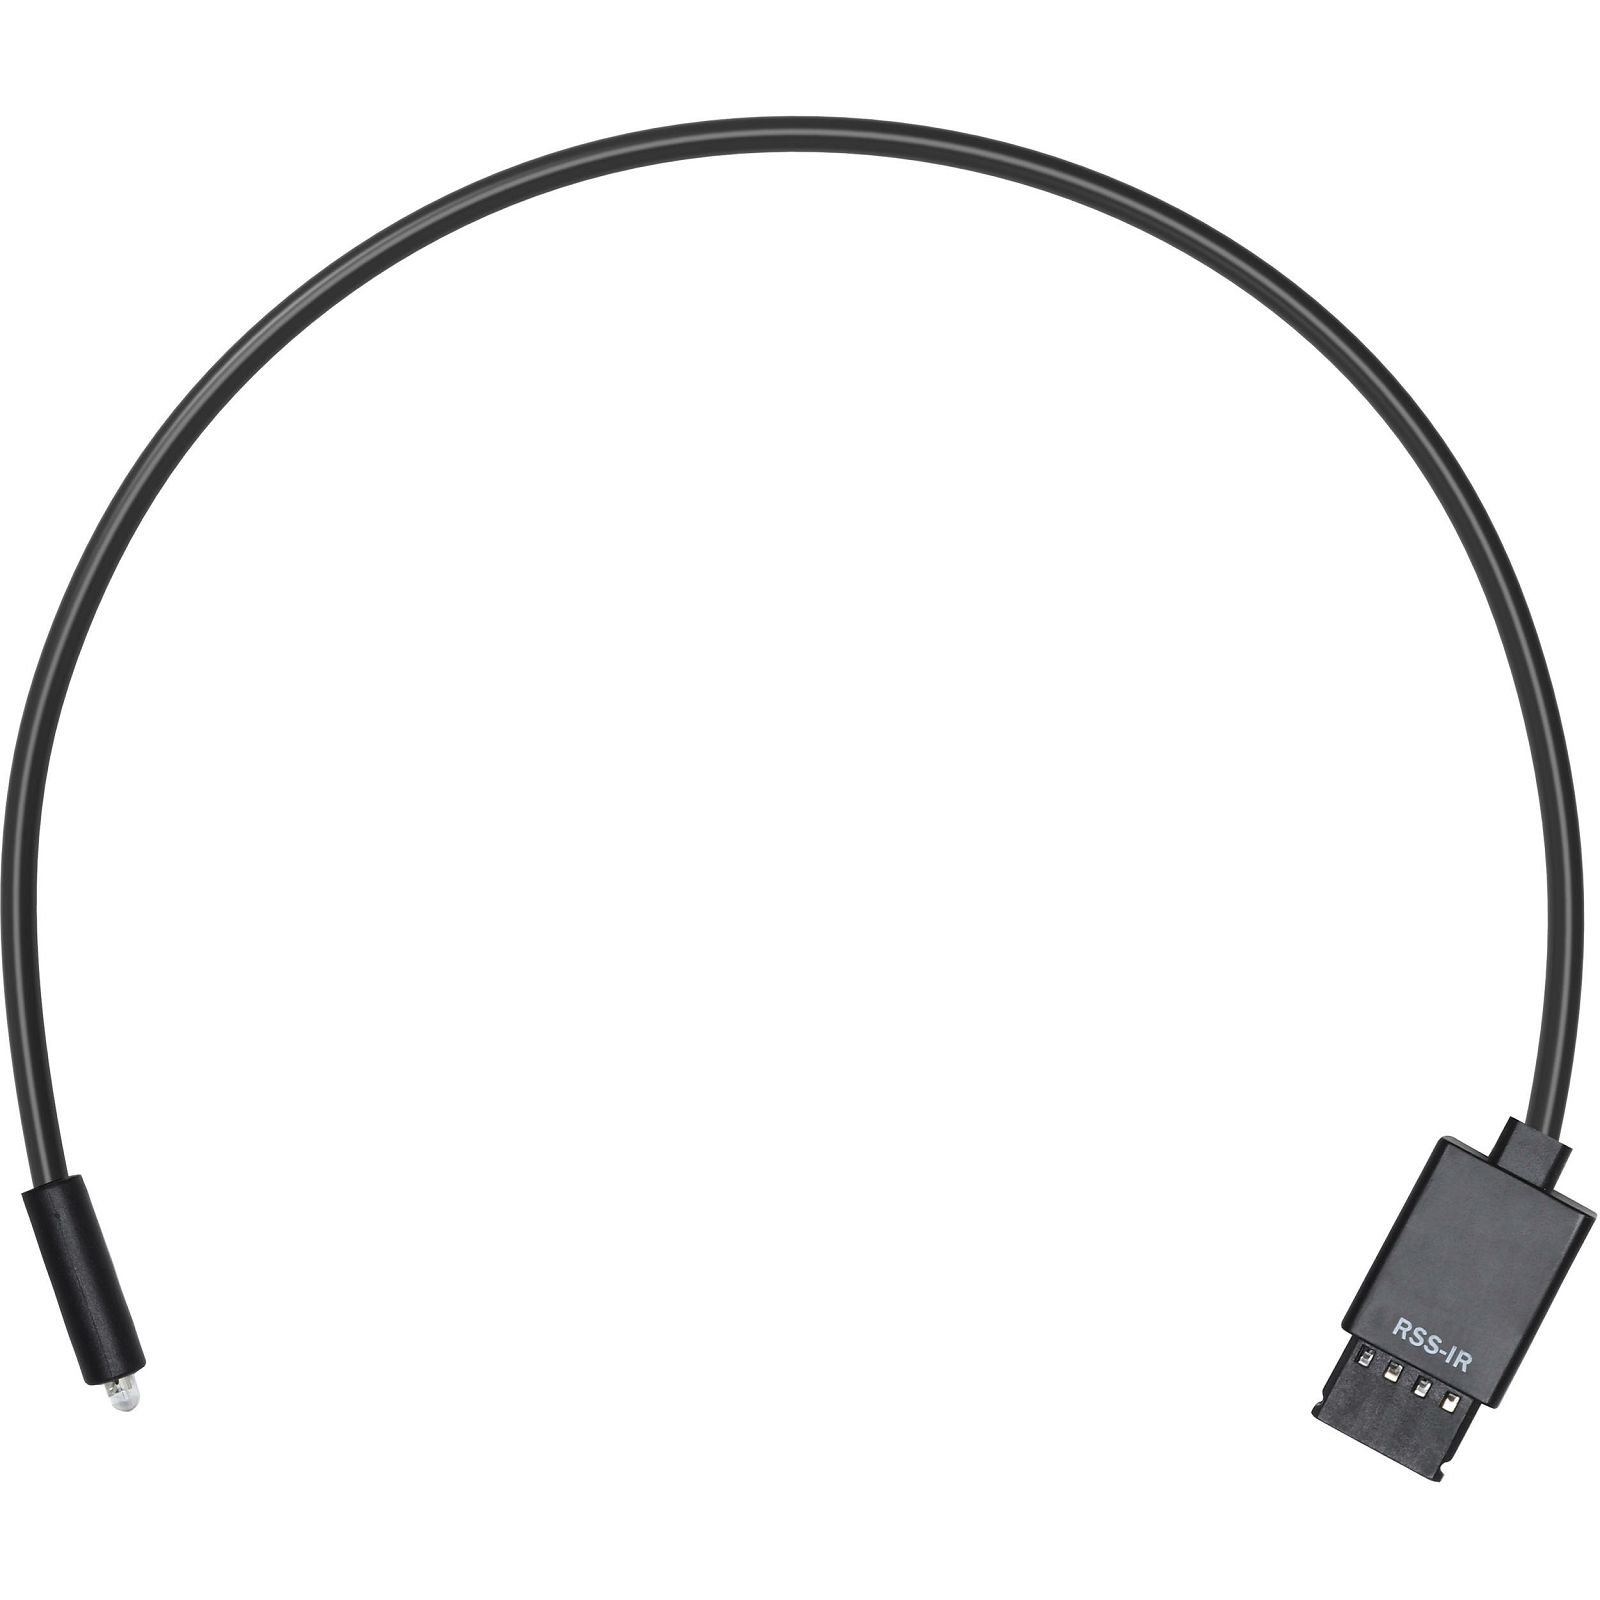 DJI Ronin-S Spare Part 04 IR Control Cable (CP.RN.00000009.01)